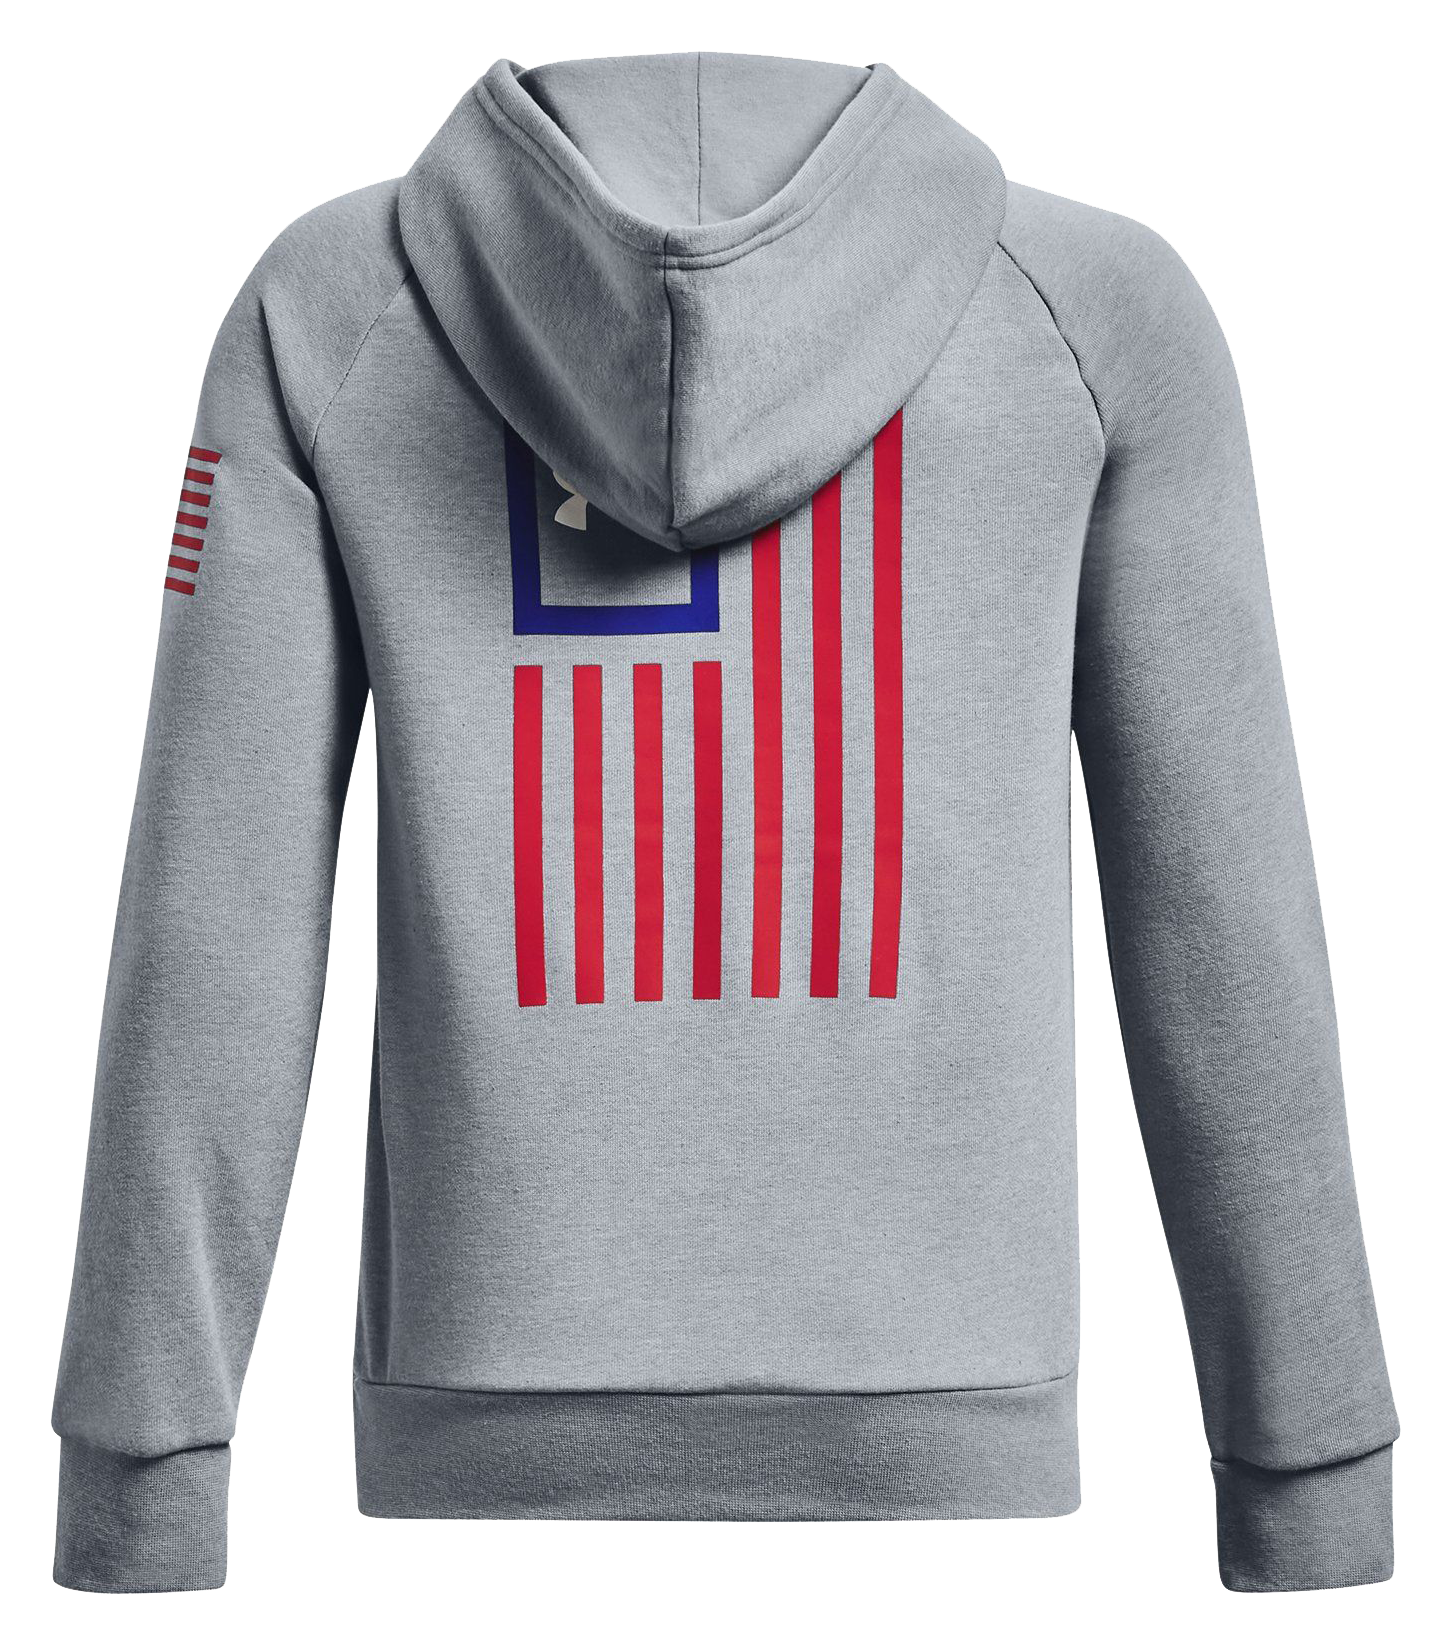 Under Armour Freedom Rival Fleece Long-Sleeve Hoodie for Kids - Steel Light Heather/Red - XS